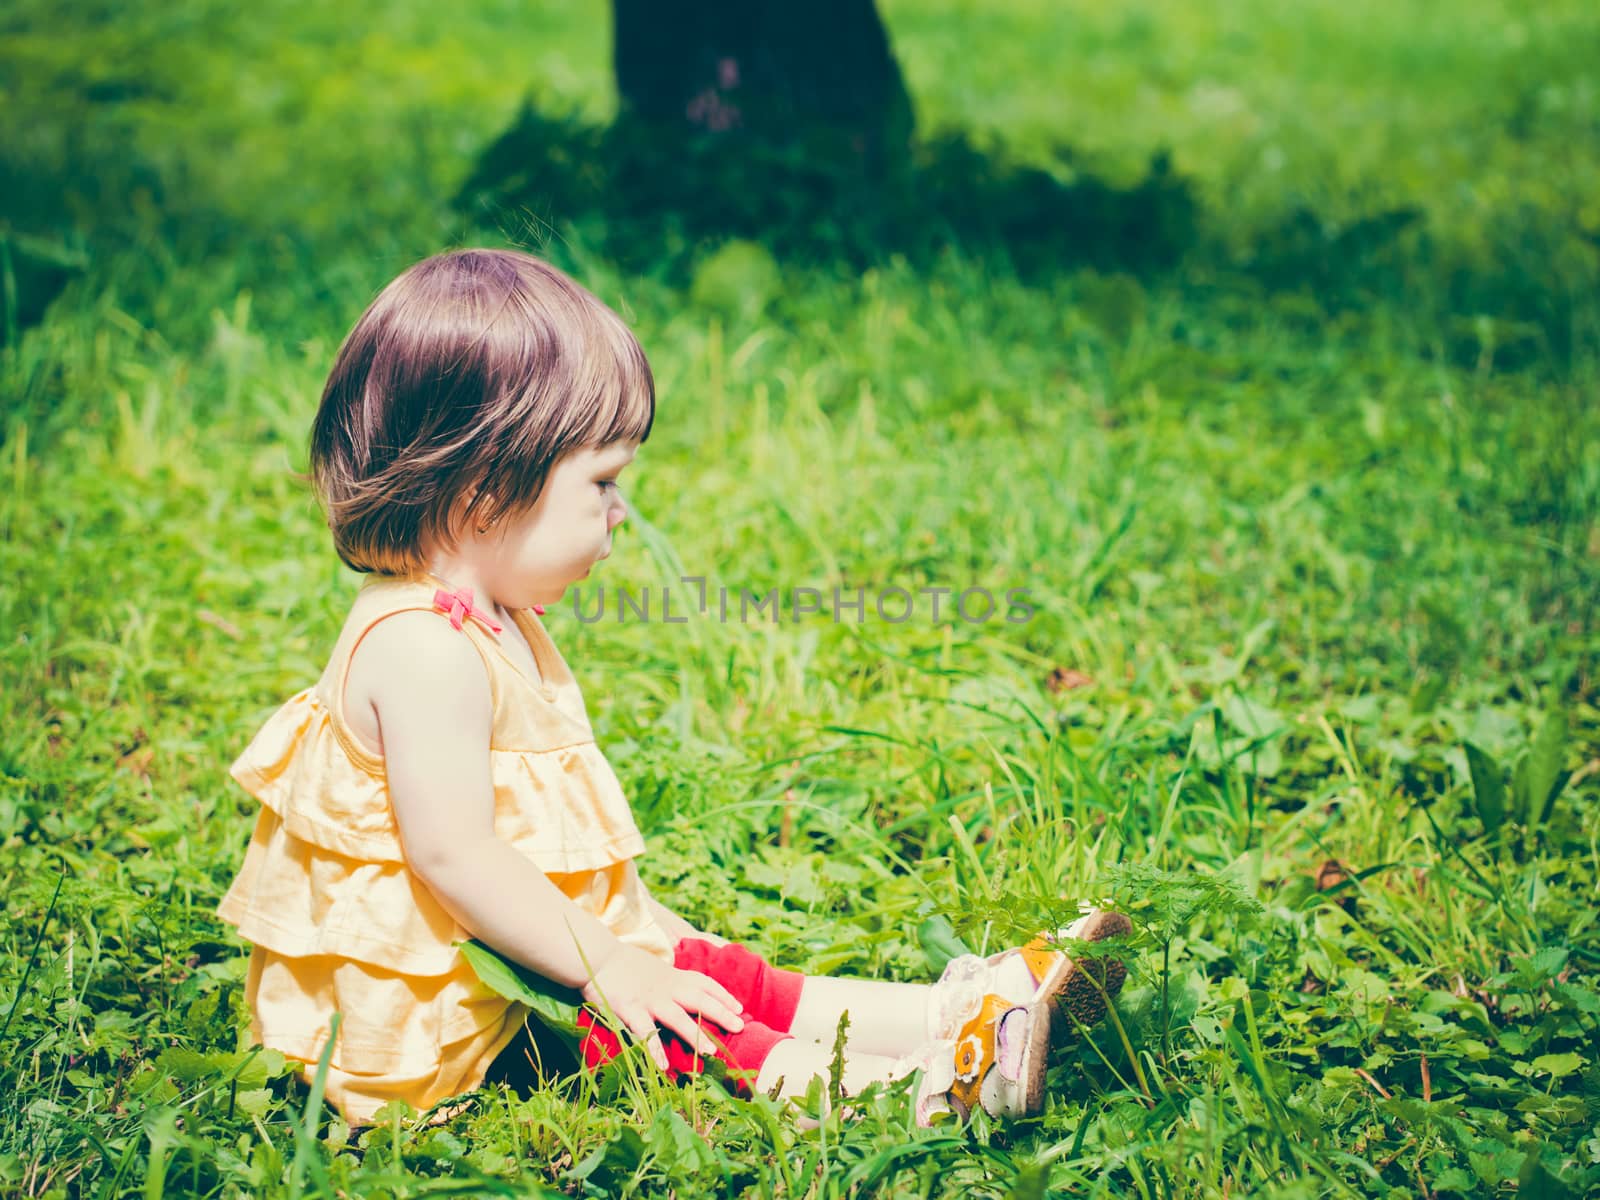 One year old baby girl sitting on grass and looking away. Colorful image with copy space